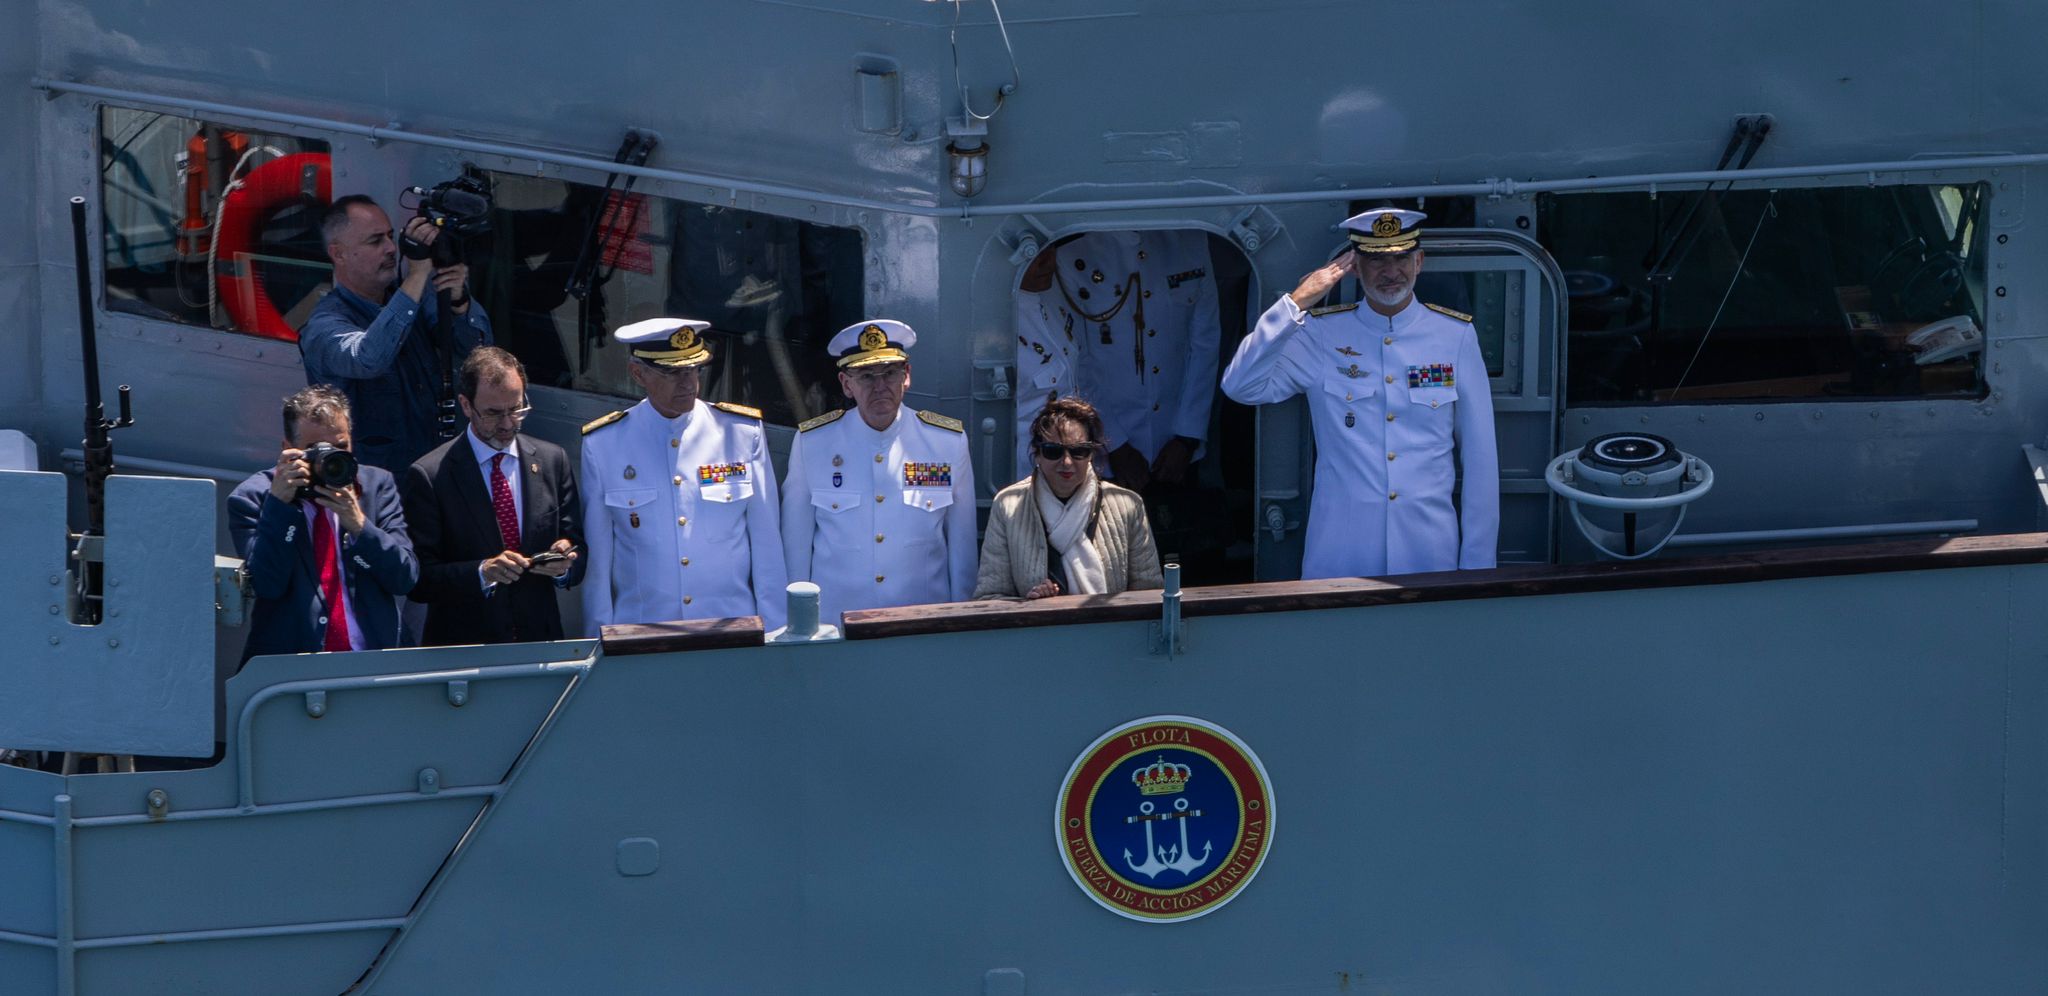 Felipe VI accompanied by the Minister of Defence and the CHOD reviews the ships